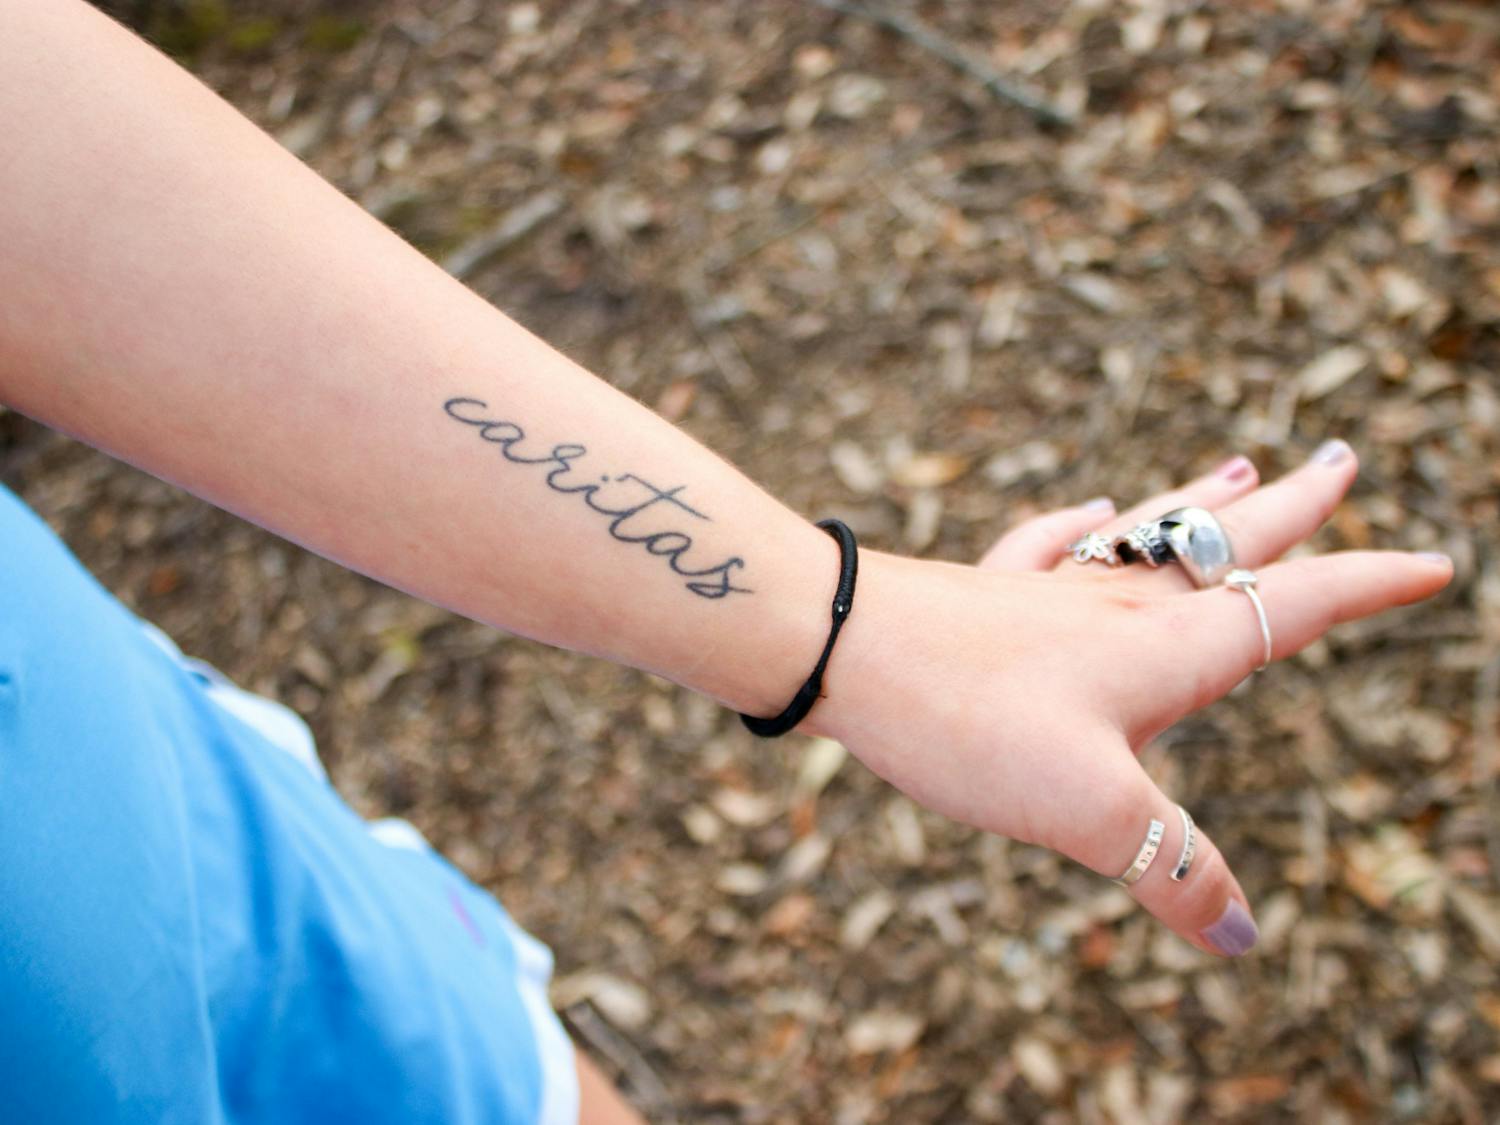 Sandford said she hopes to be a teacher after graduation. This career path was inspired by her high school Latin teacher, who she paid tribute to in the “caritas” tattoo inked on her forearm. The word — loosely translated to “universal love of humankind” — embodies a mindset that Sandford strives to carry with her each day.